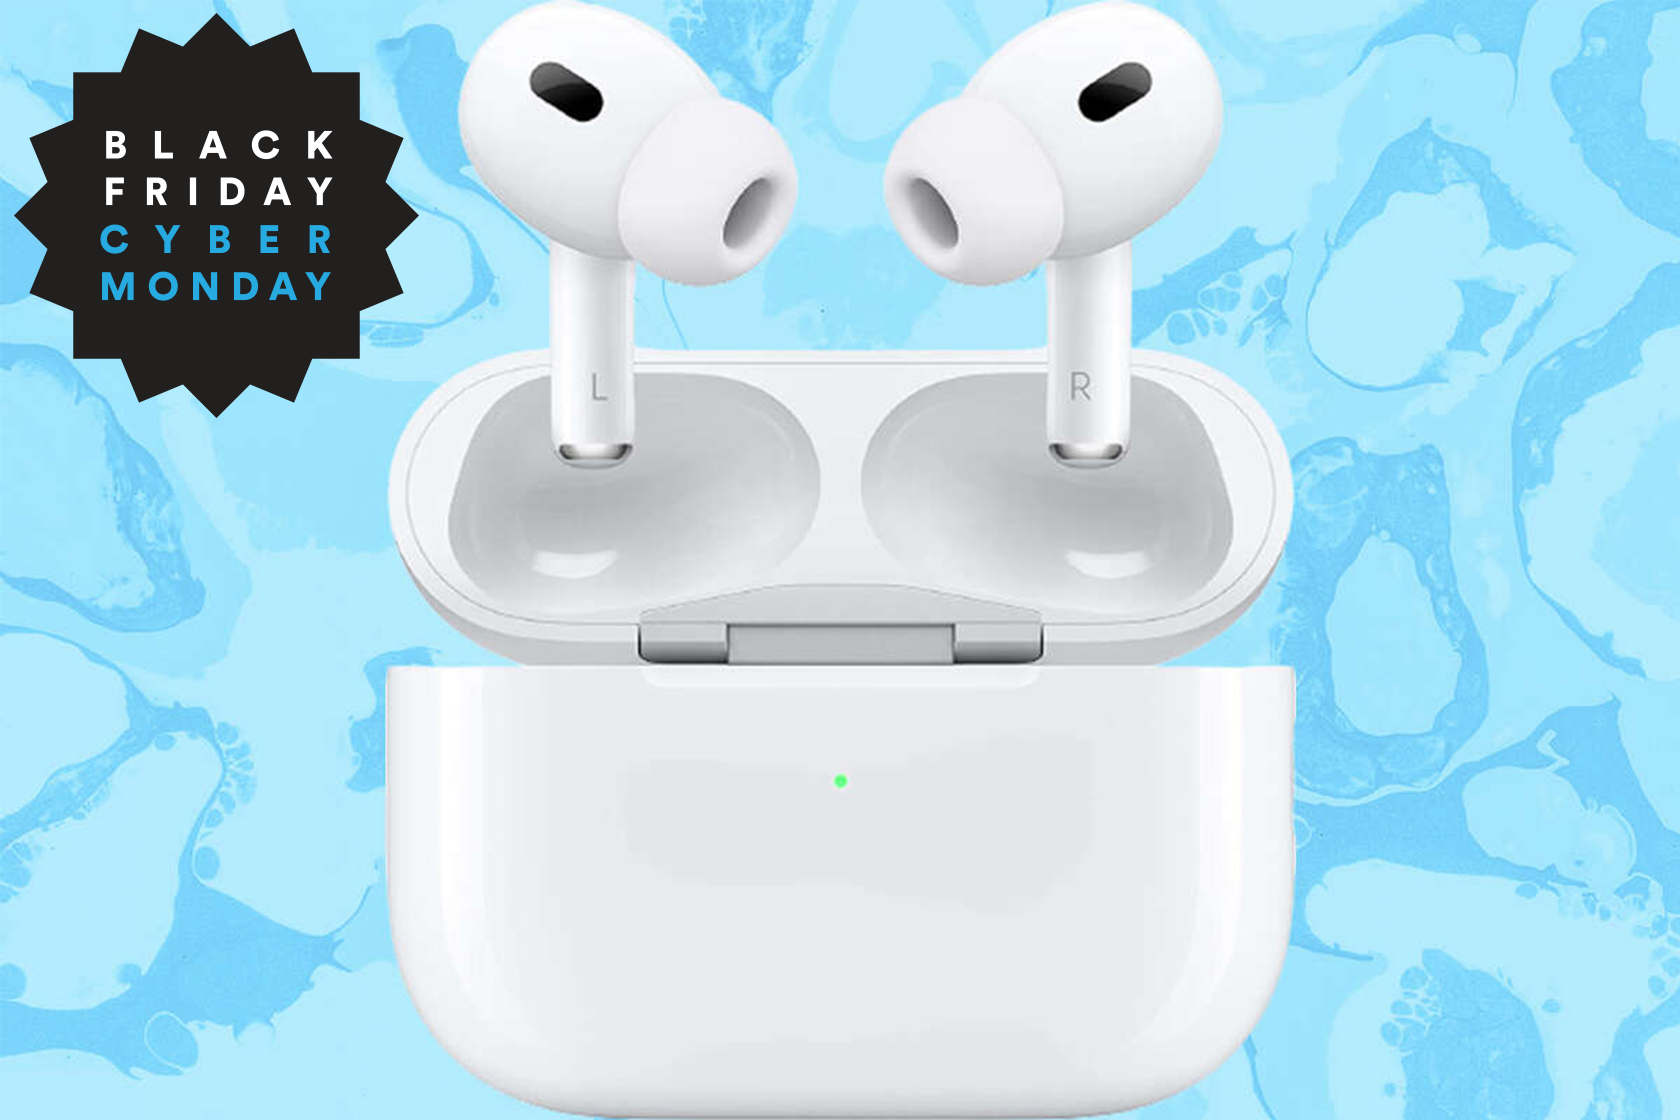 AirPods Pro 2 marked to lowest price Amazon